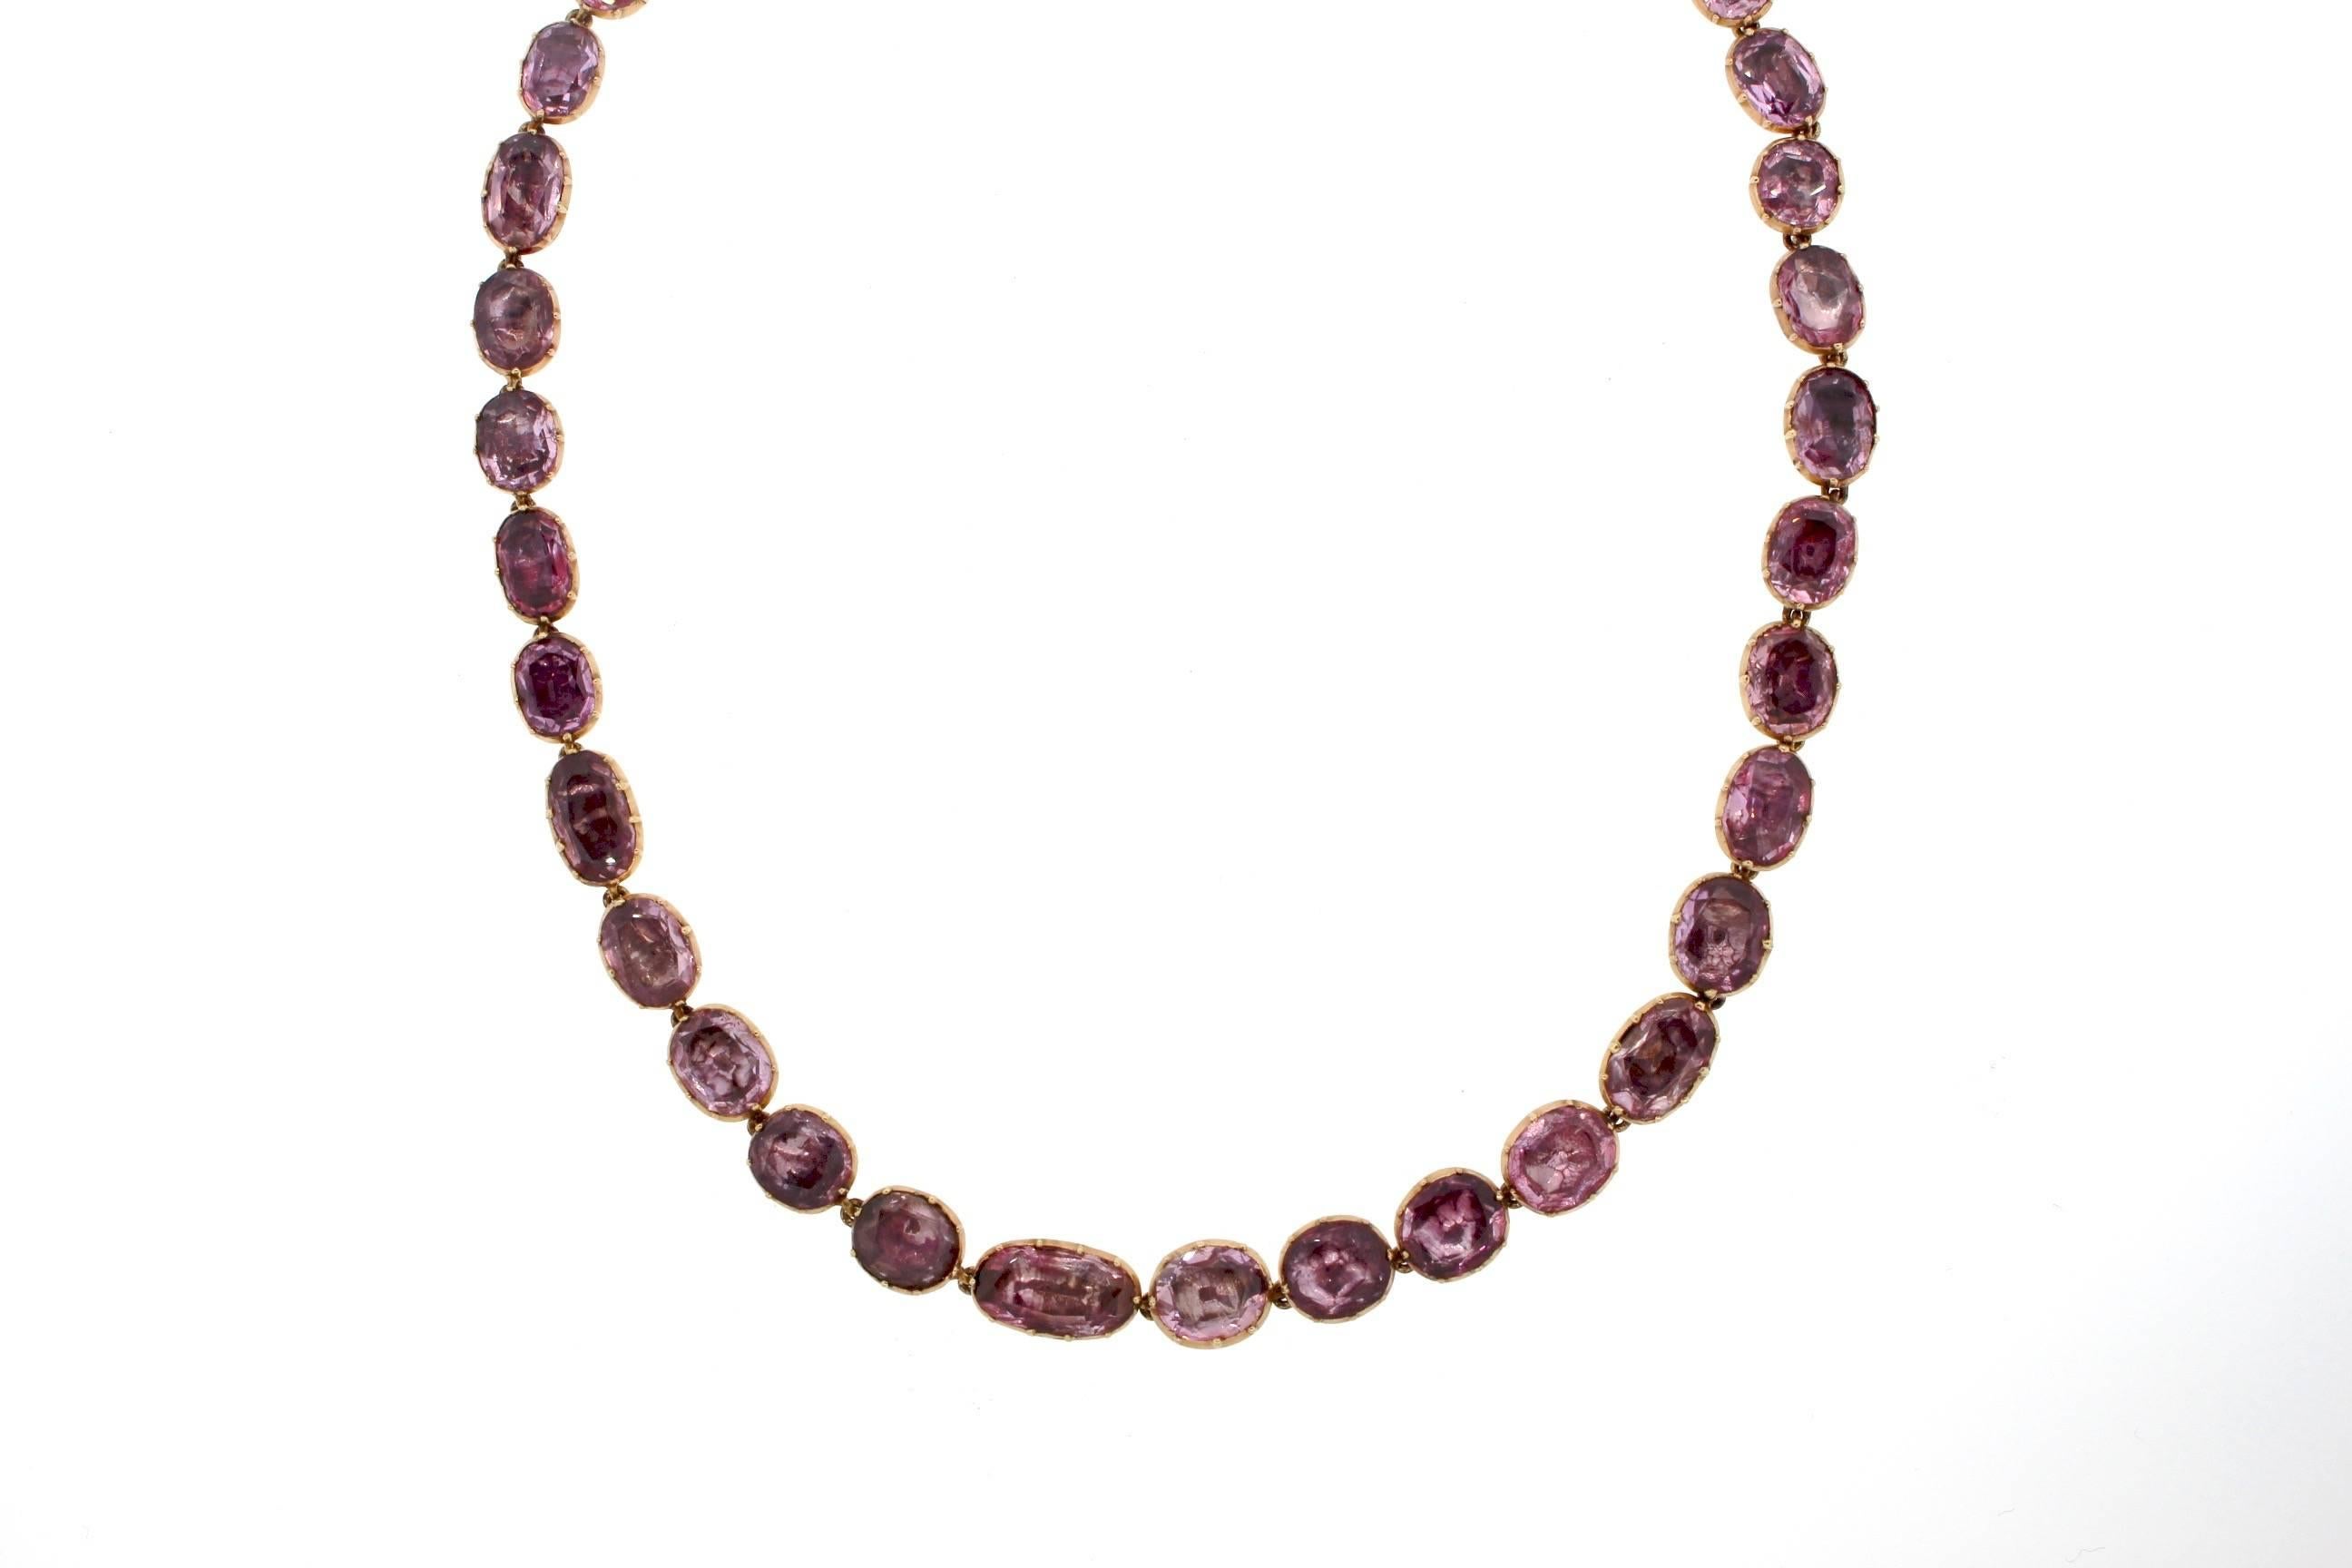 Georgian pink topaz foil backed riviere necklaces are becoming more and more rare.  The pretty light pink to slightly purple color are enhanced by the closed back setting characteristic of Georgian jewelry craftsmanship.  The foil behind the stones